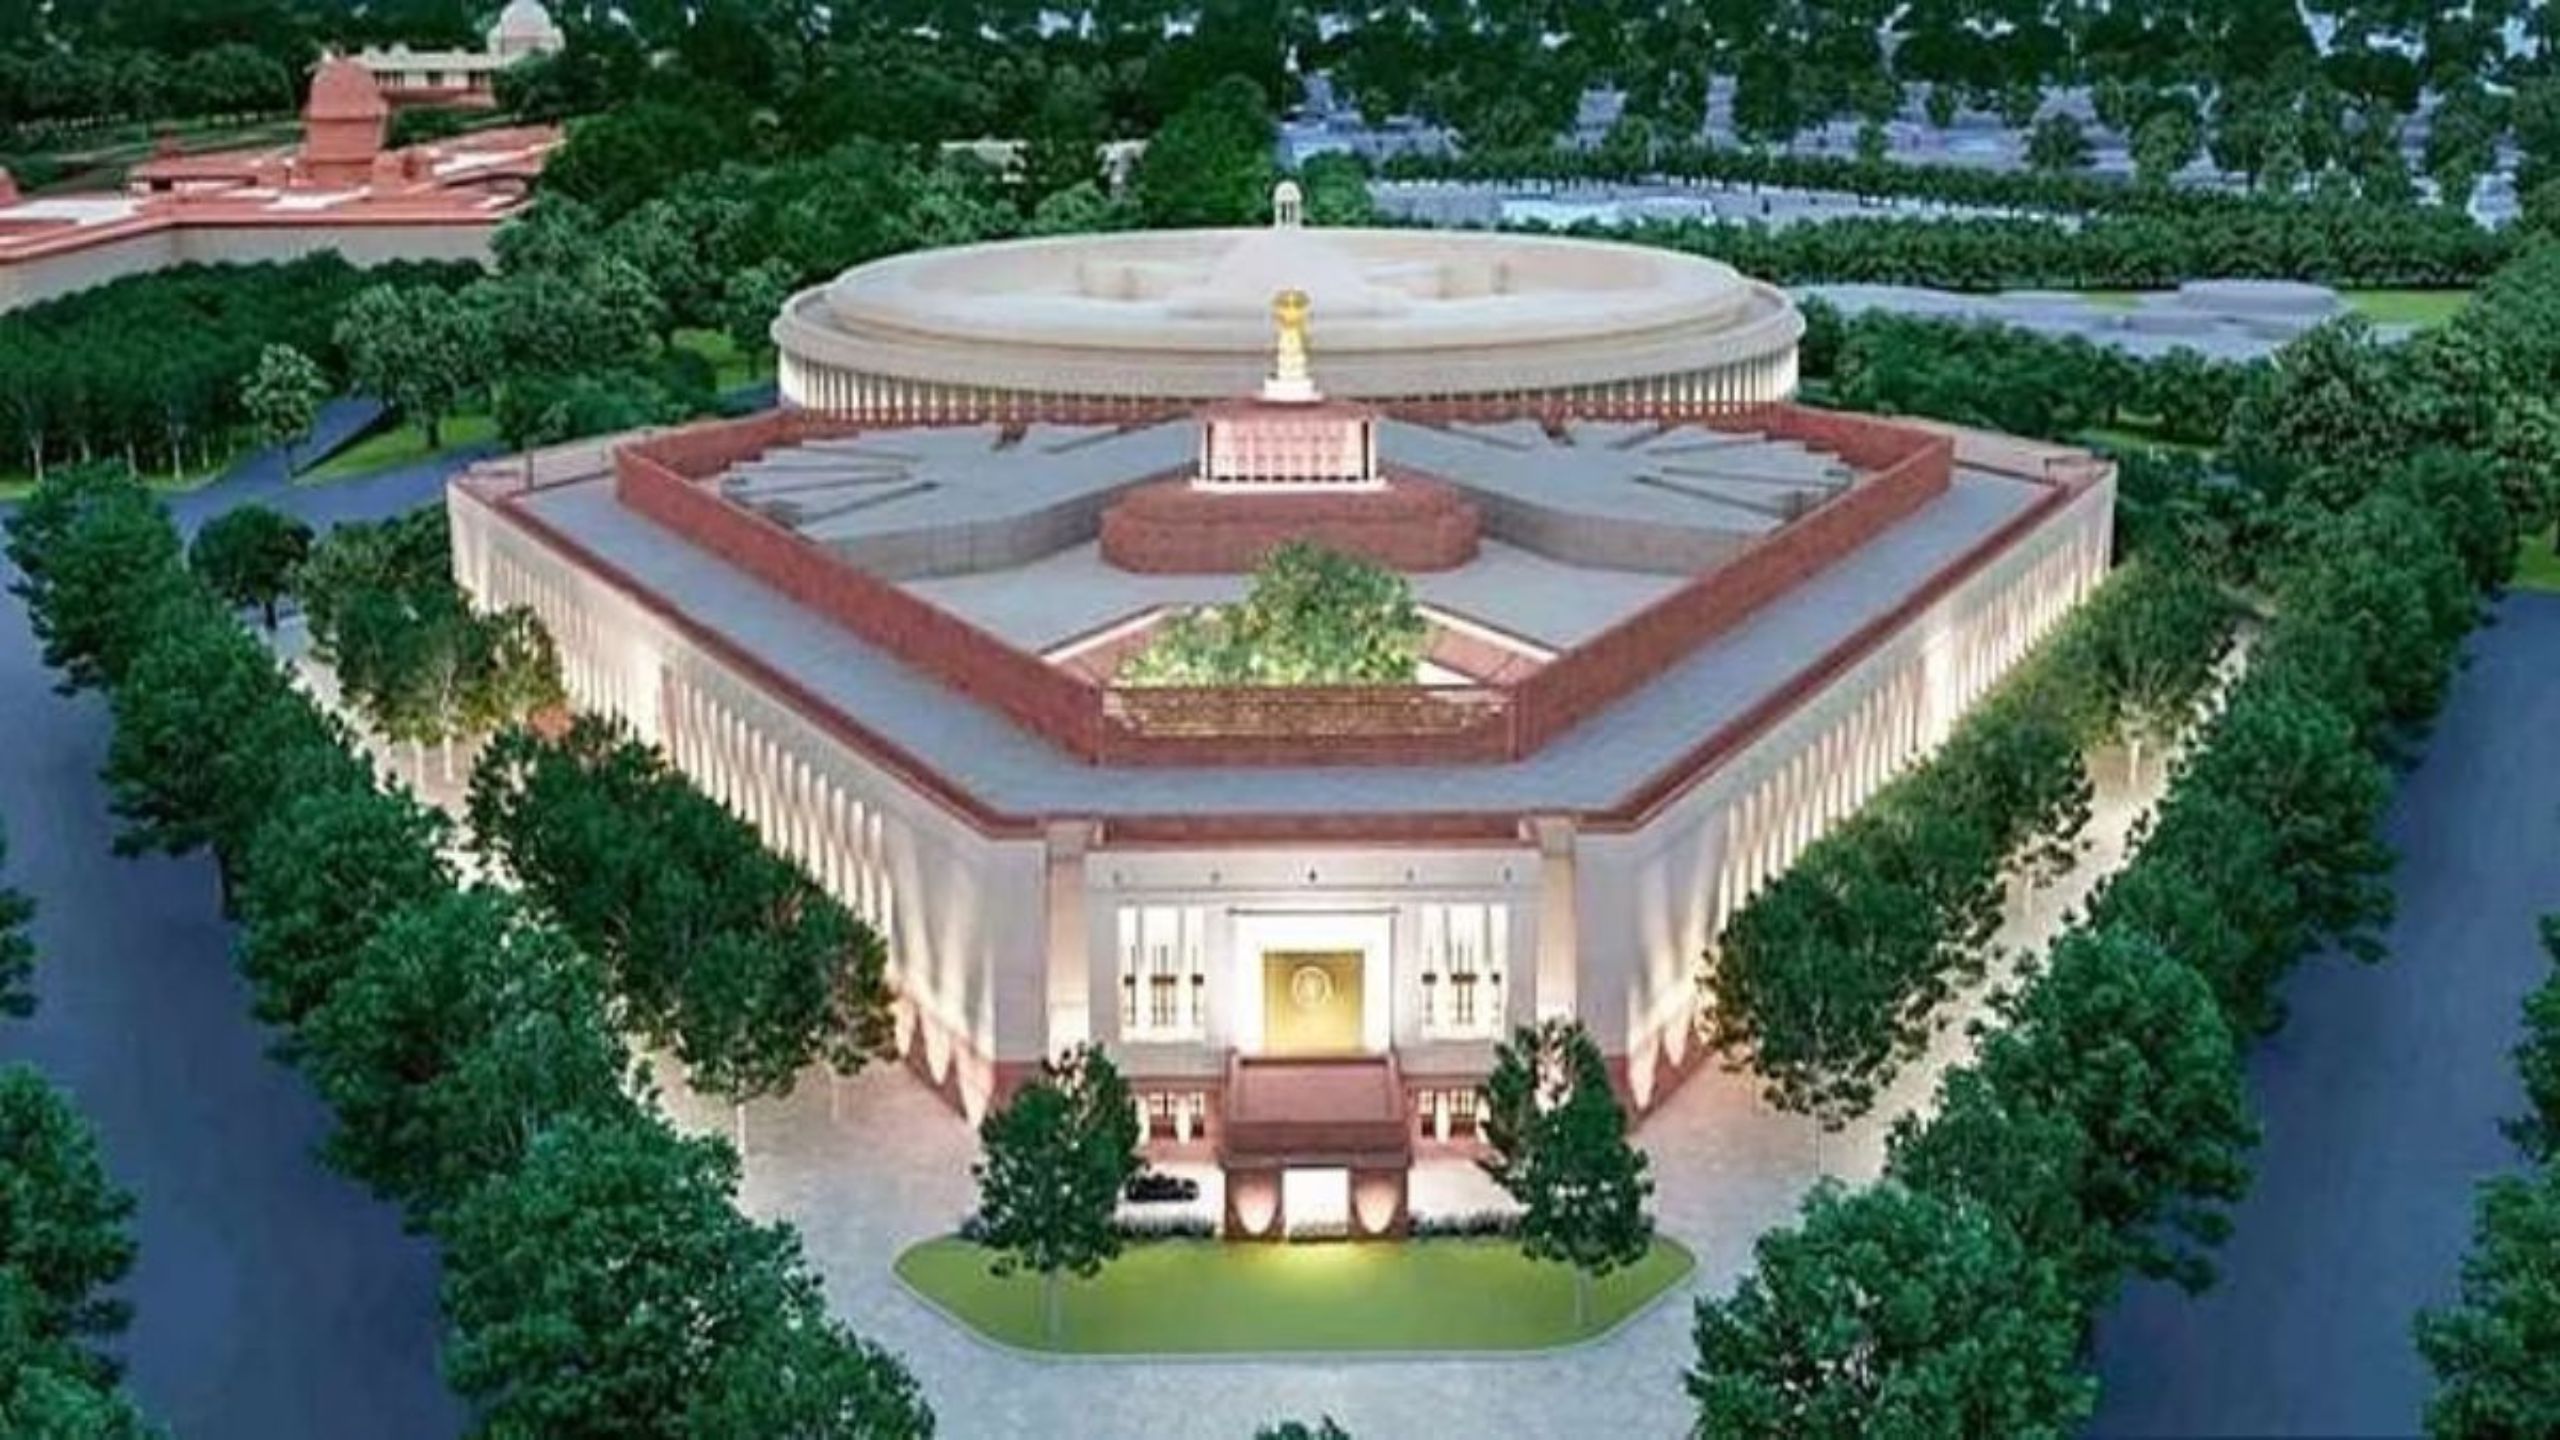 India;s newly constructed Parliament